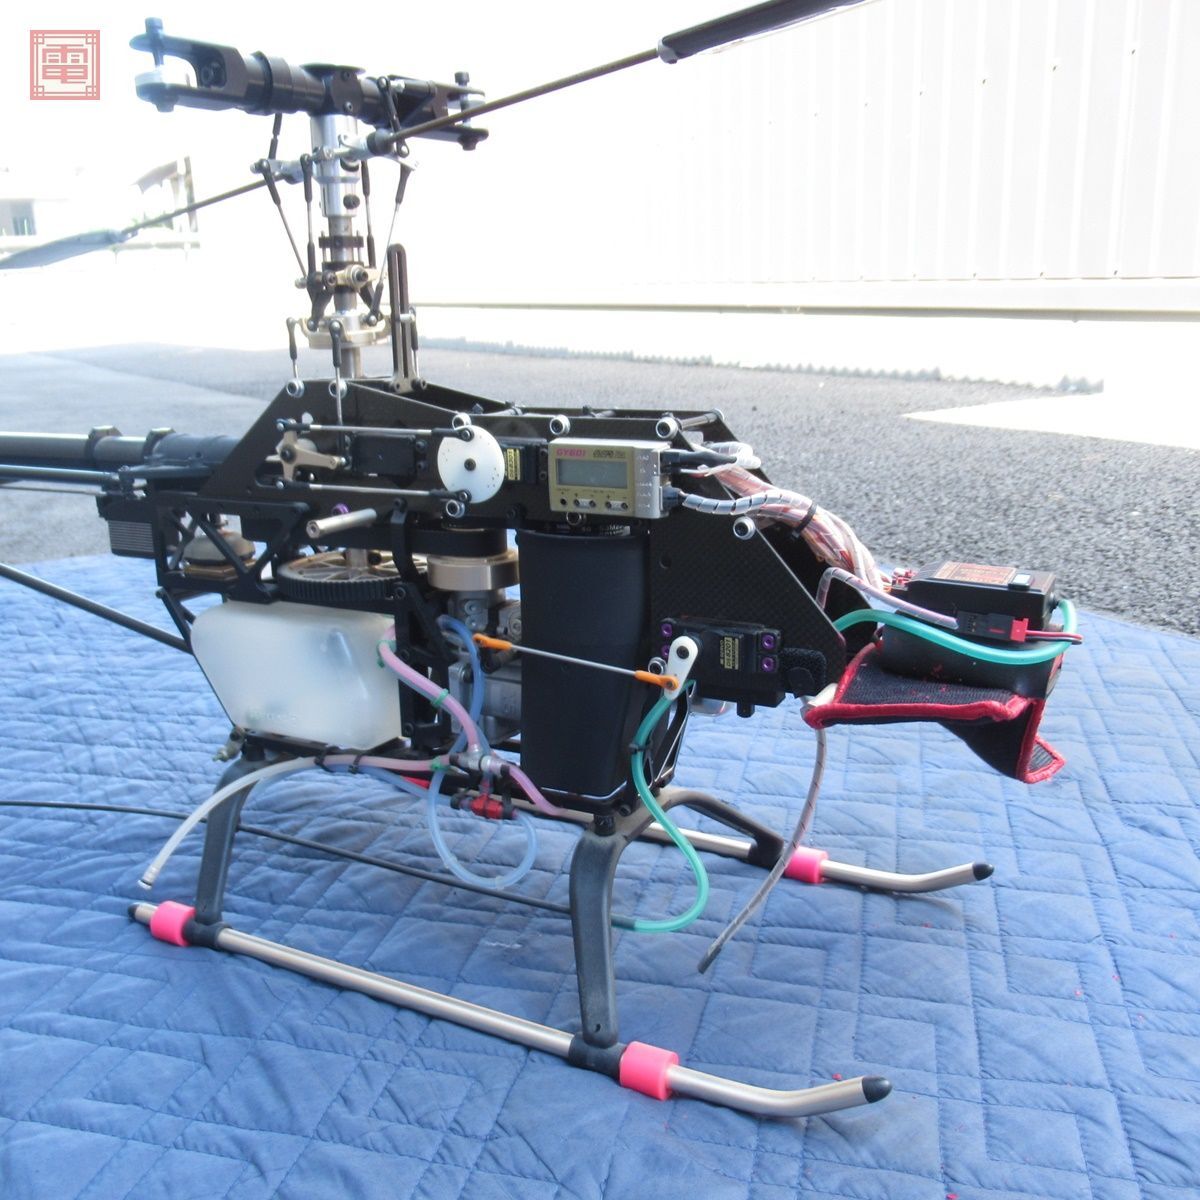  Kyosho kyali bar 90 engine / receiver / servo / Gyro installing total length approximately 145cm RC radio controller helicopter kyosyo CALIBER90 operation not yet verification present condition goods [SK